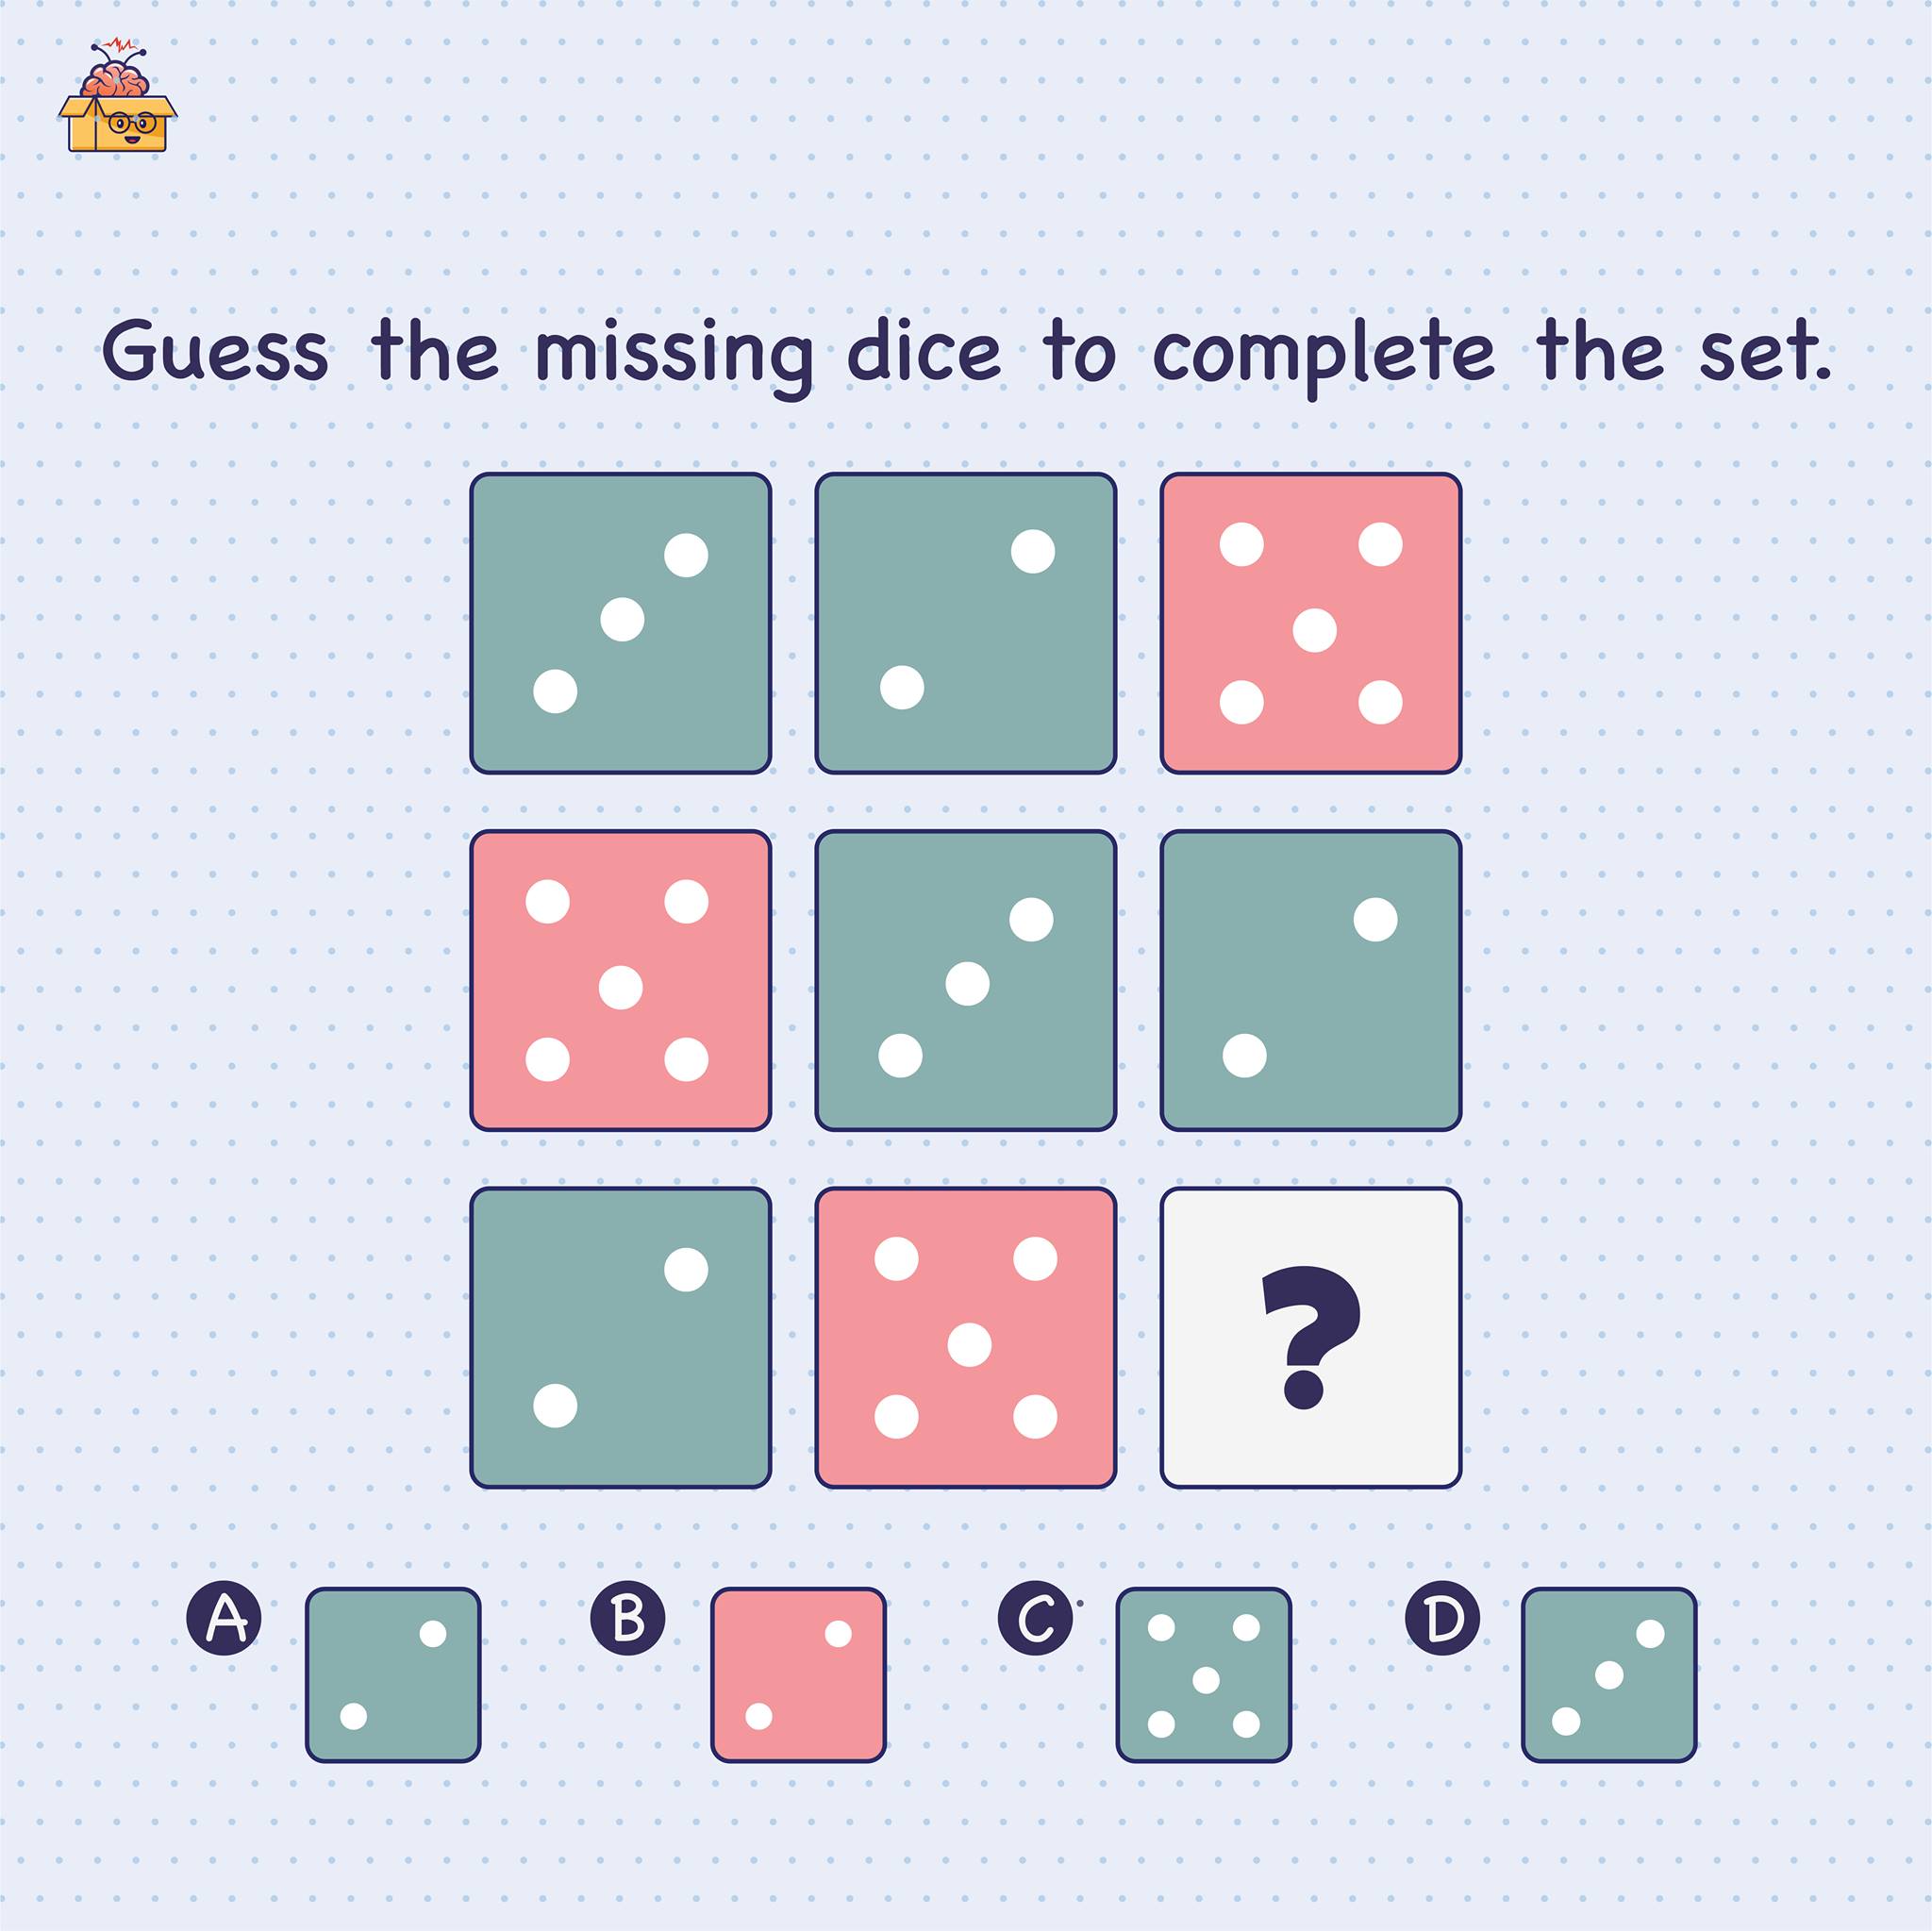 A quiz game: ridiculous questions, guessing and fun for the whole